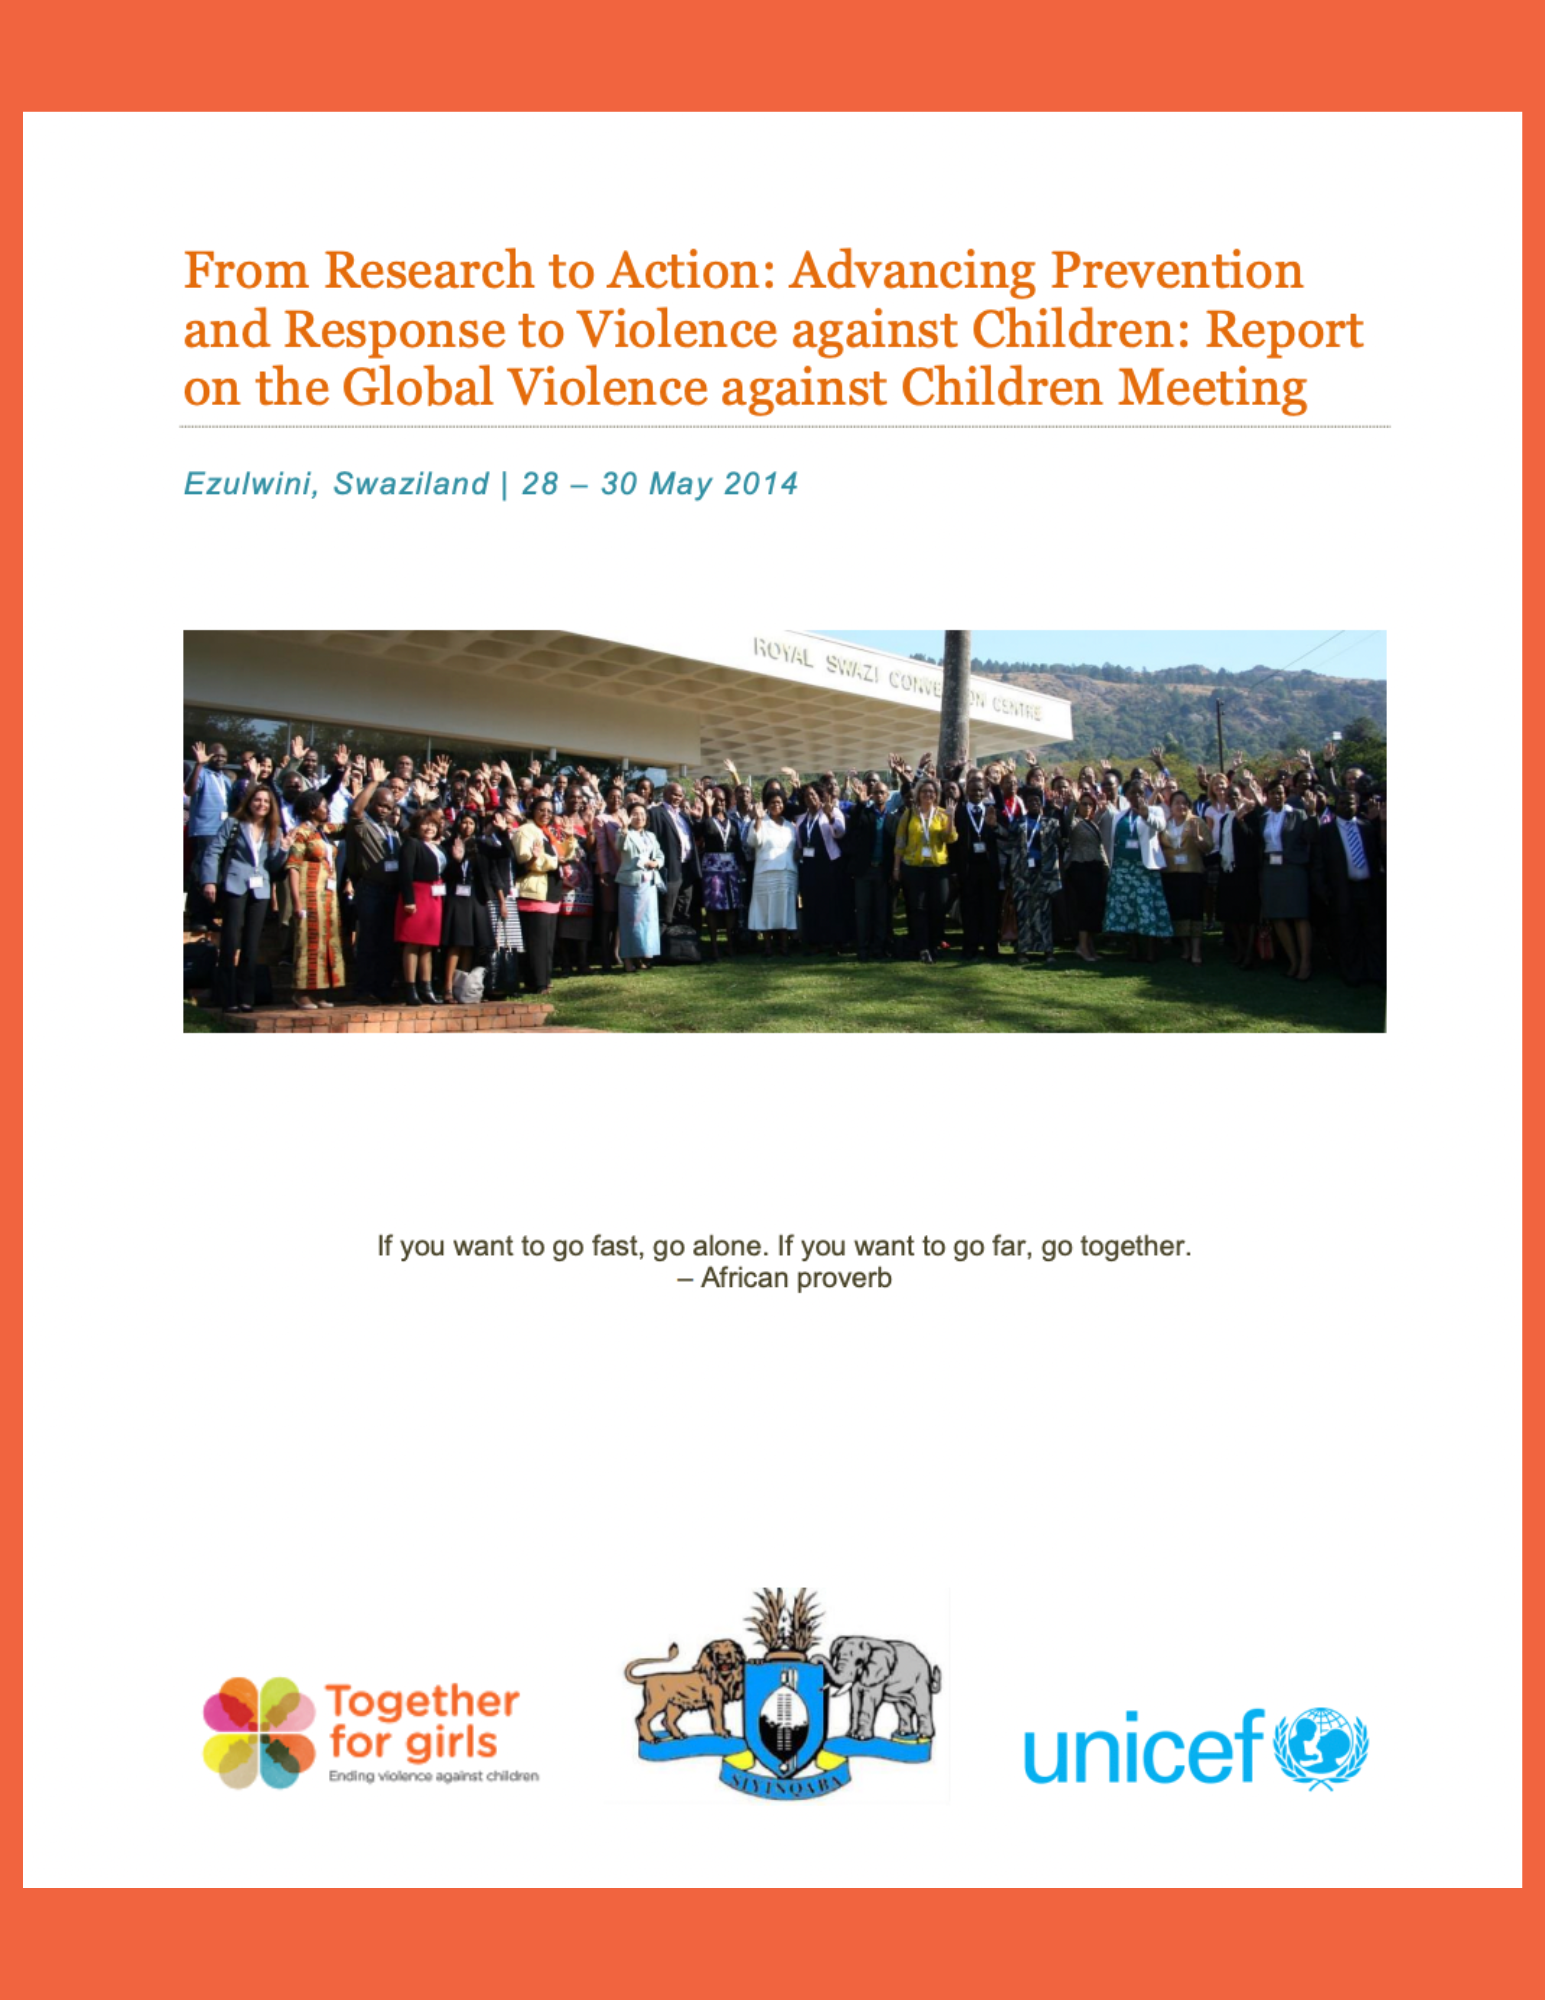 From Research to Action: Advancing Prevention and Response to Violence against Children: Report on the Global Violence against Children Meeting